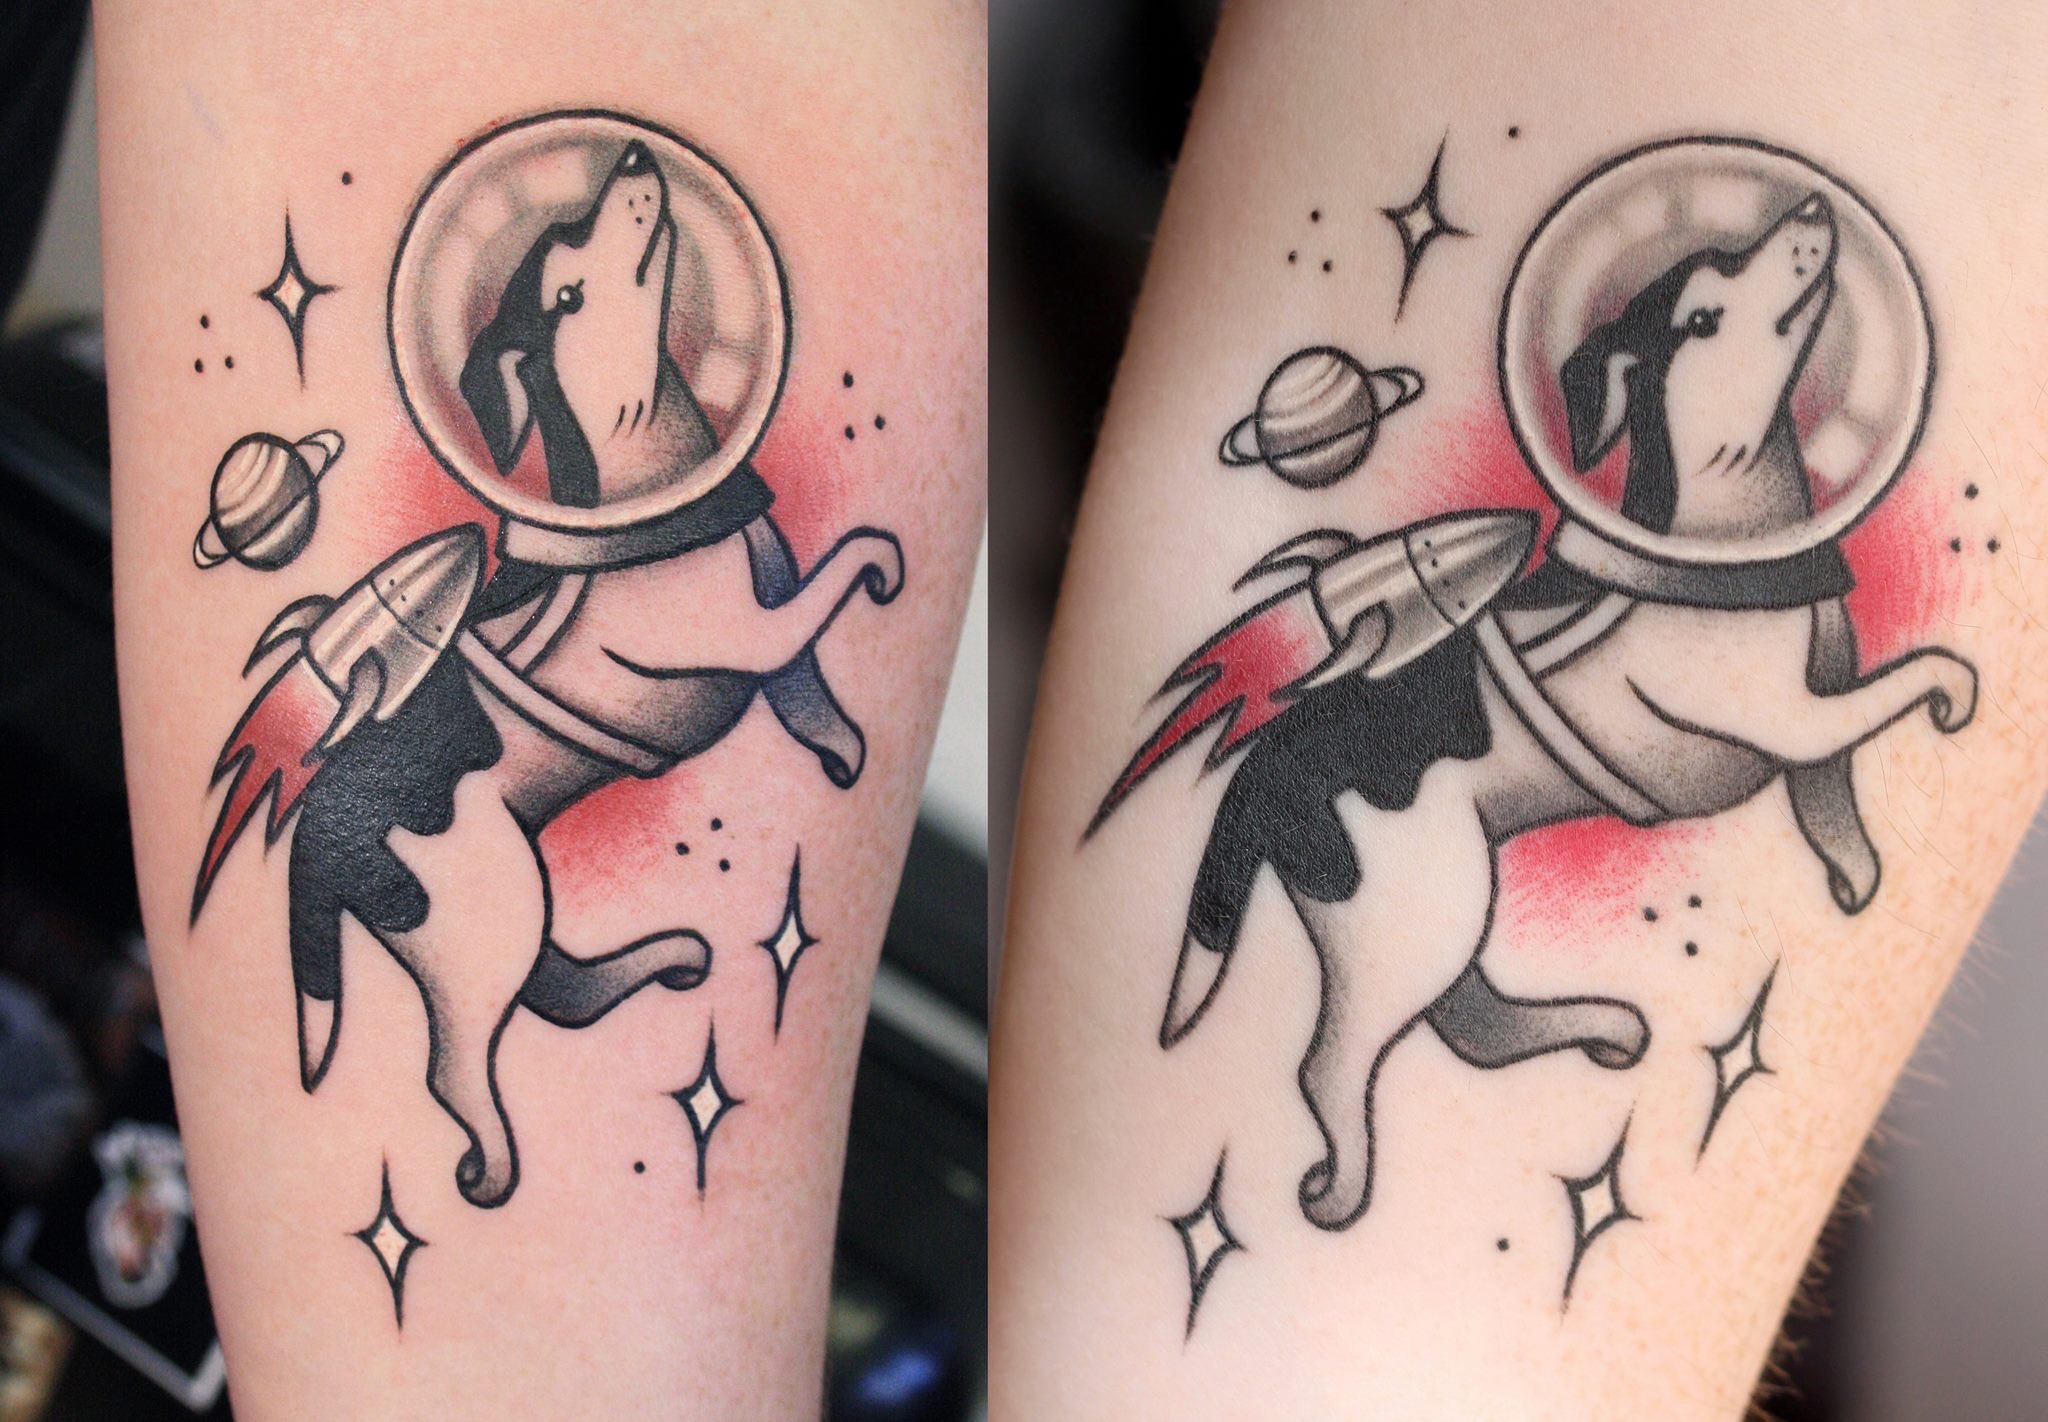 Geometric astronaut done by Maddy at Deaf Dog Ink in Saint Louis MO  r tattoos